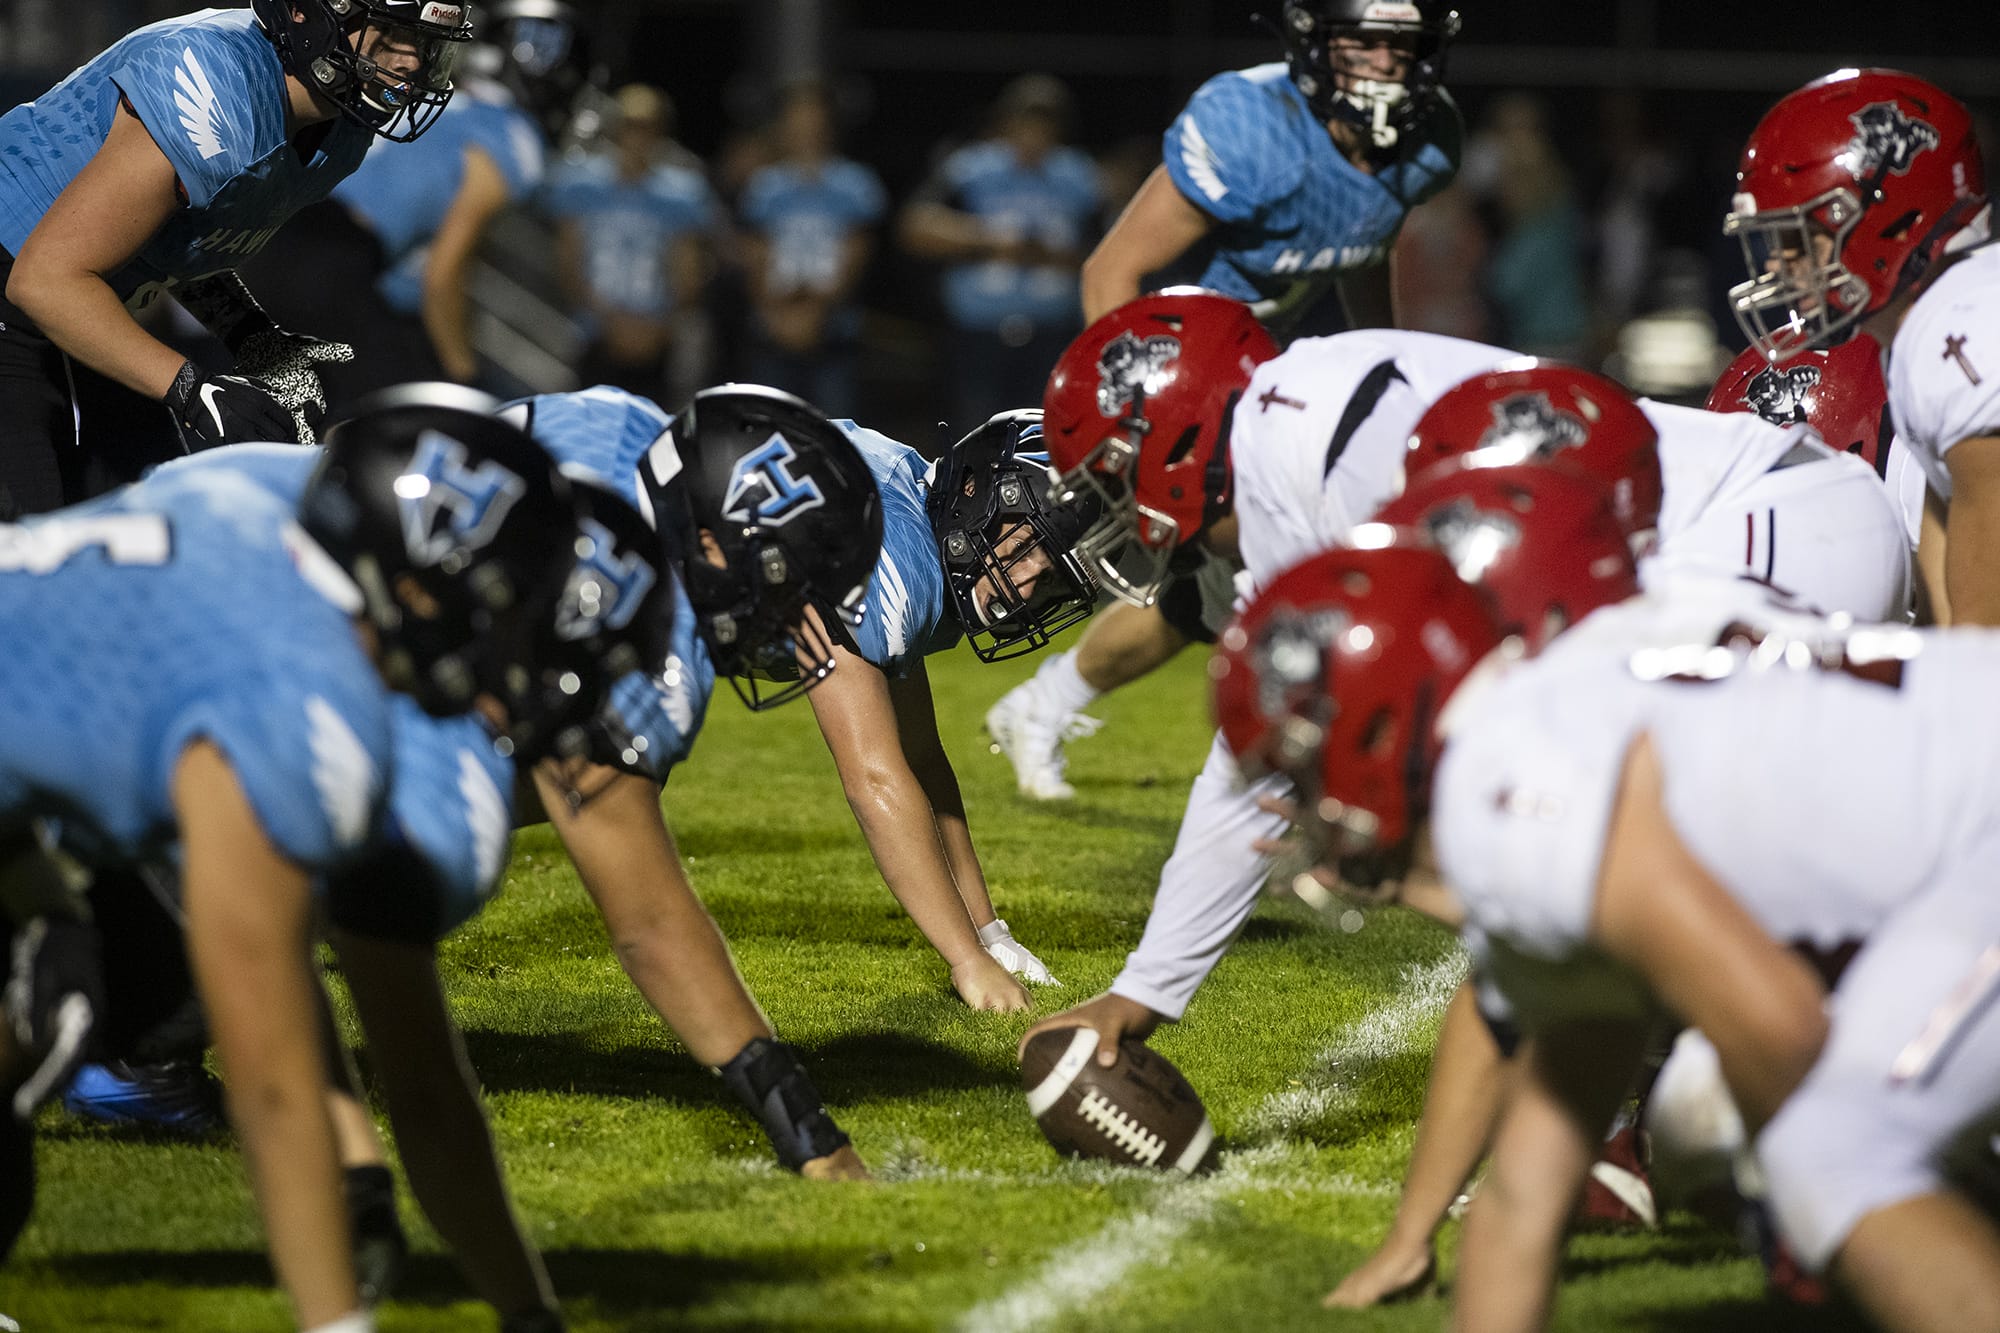 Hockinson and Archbishop Murphy face off at the line of scrimmage during Friday nightÕs game in Hockinson on Sept. 13, 2019. The HawkÕs lost 21-27.